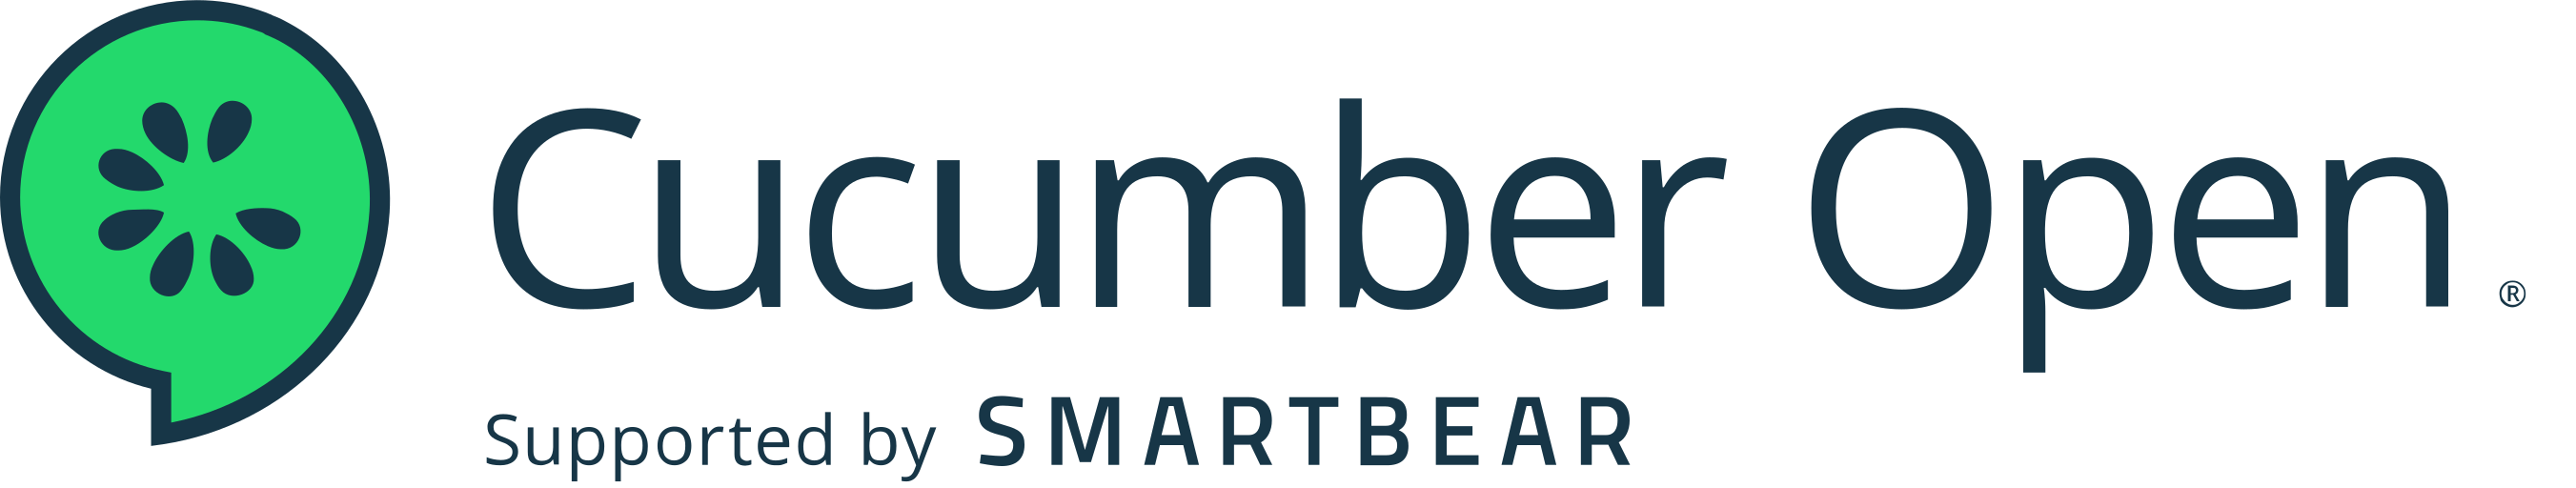 Cucumber Open - Supported by Smartbear